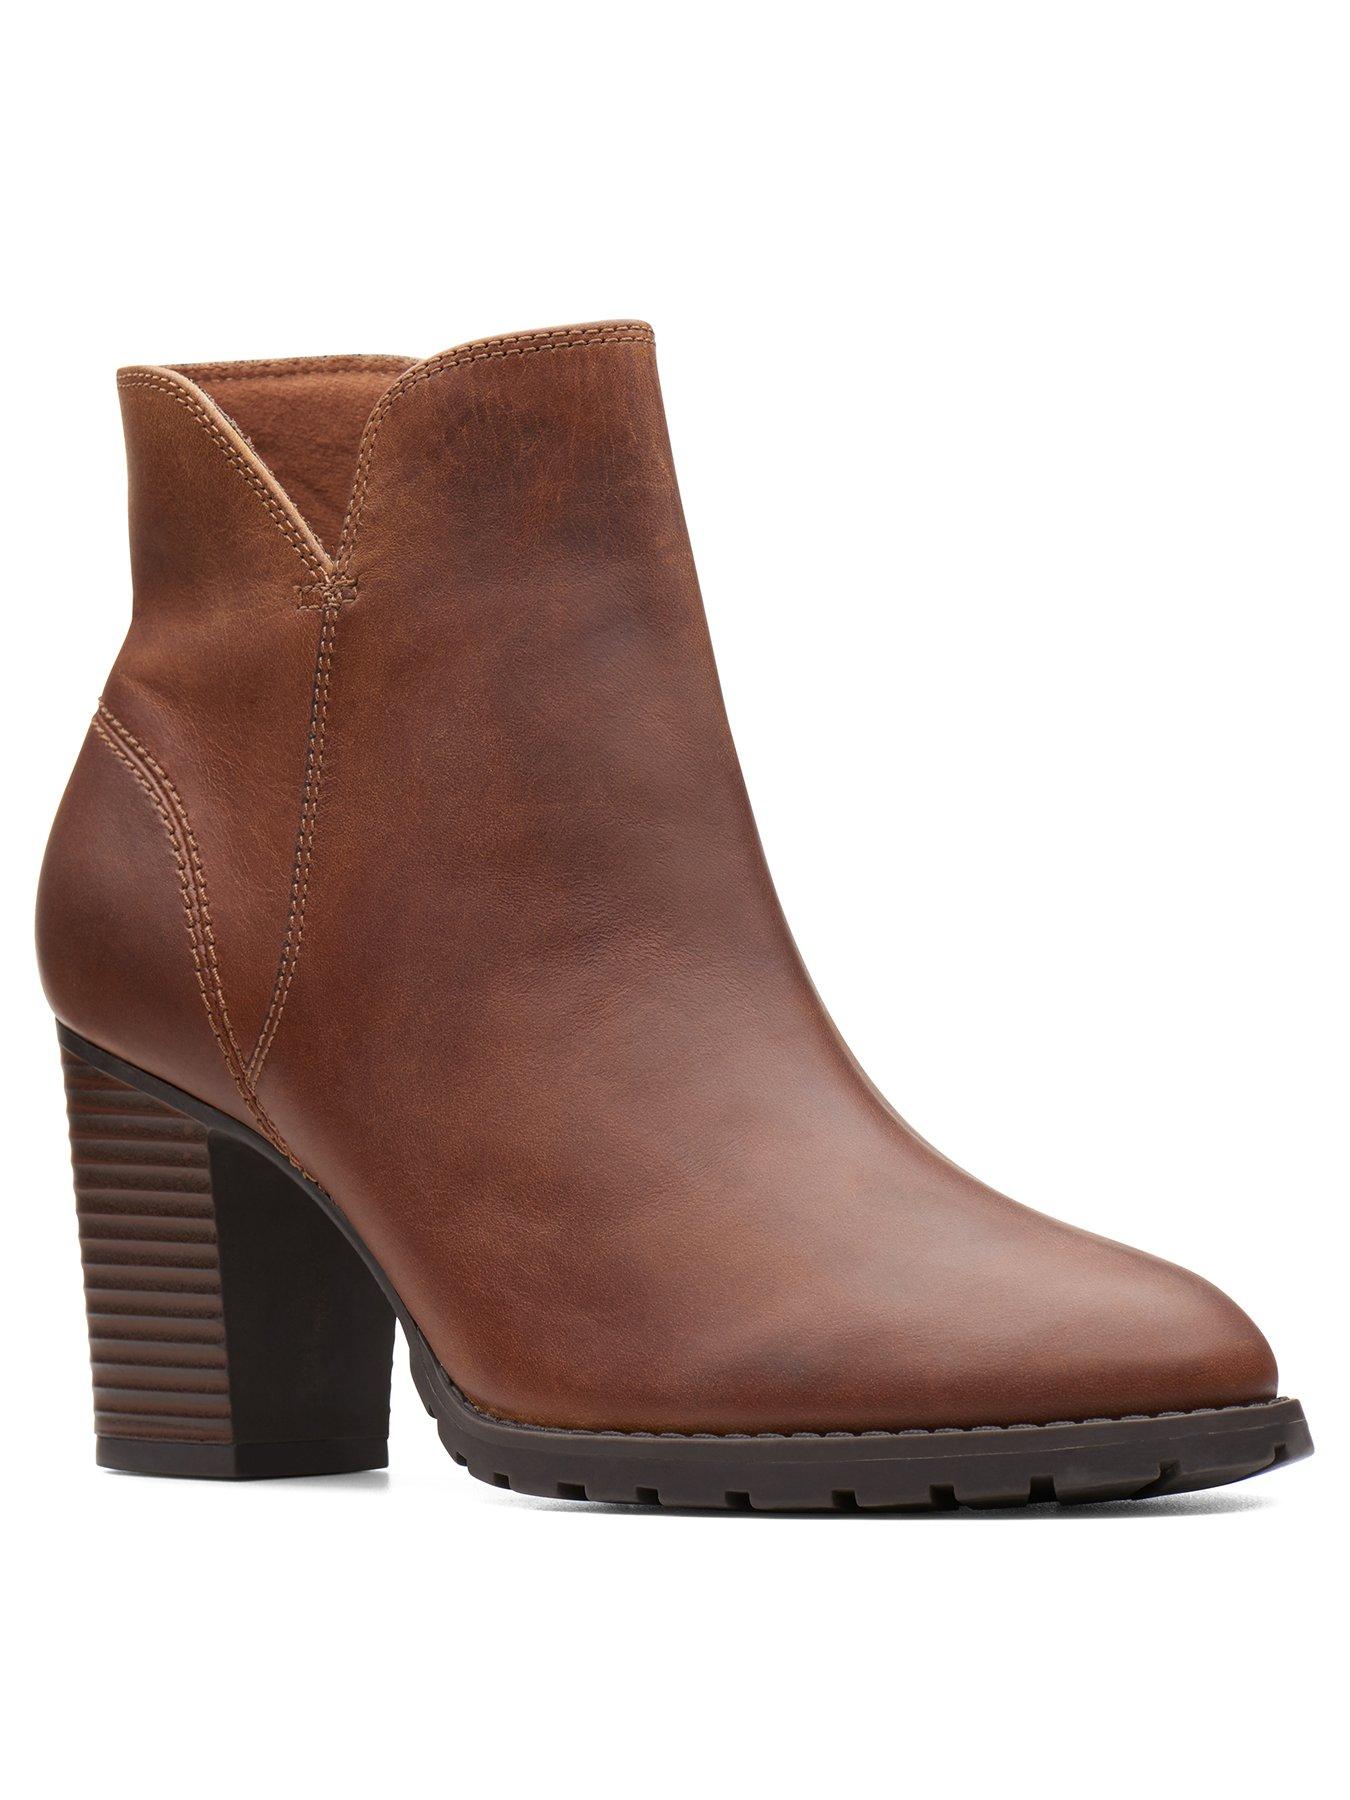 Clarks Boots | Clarks Womens Boots 